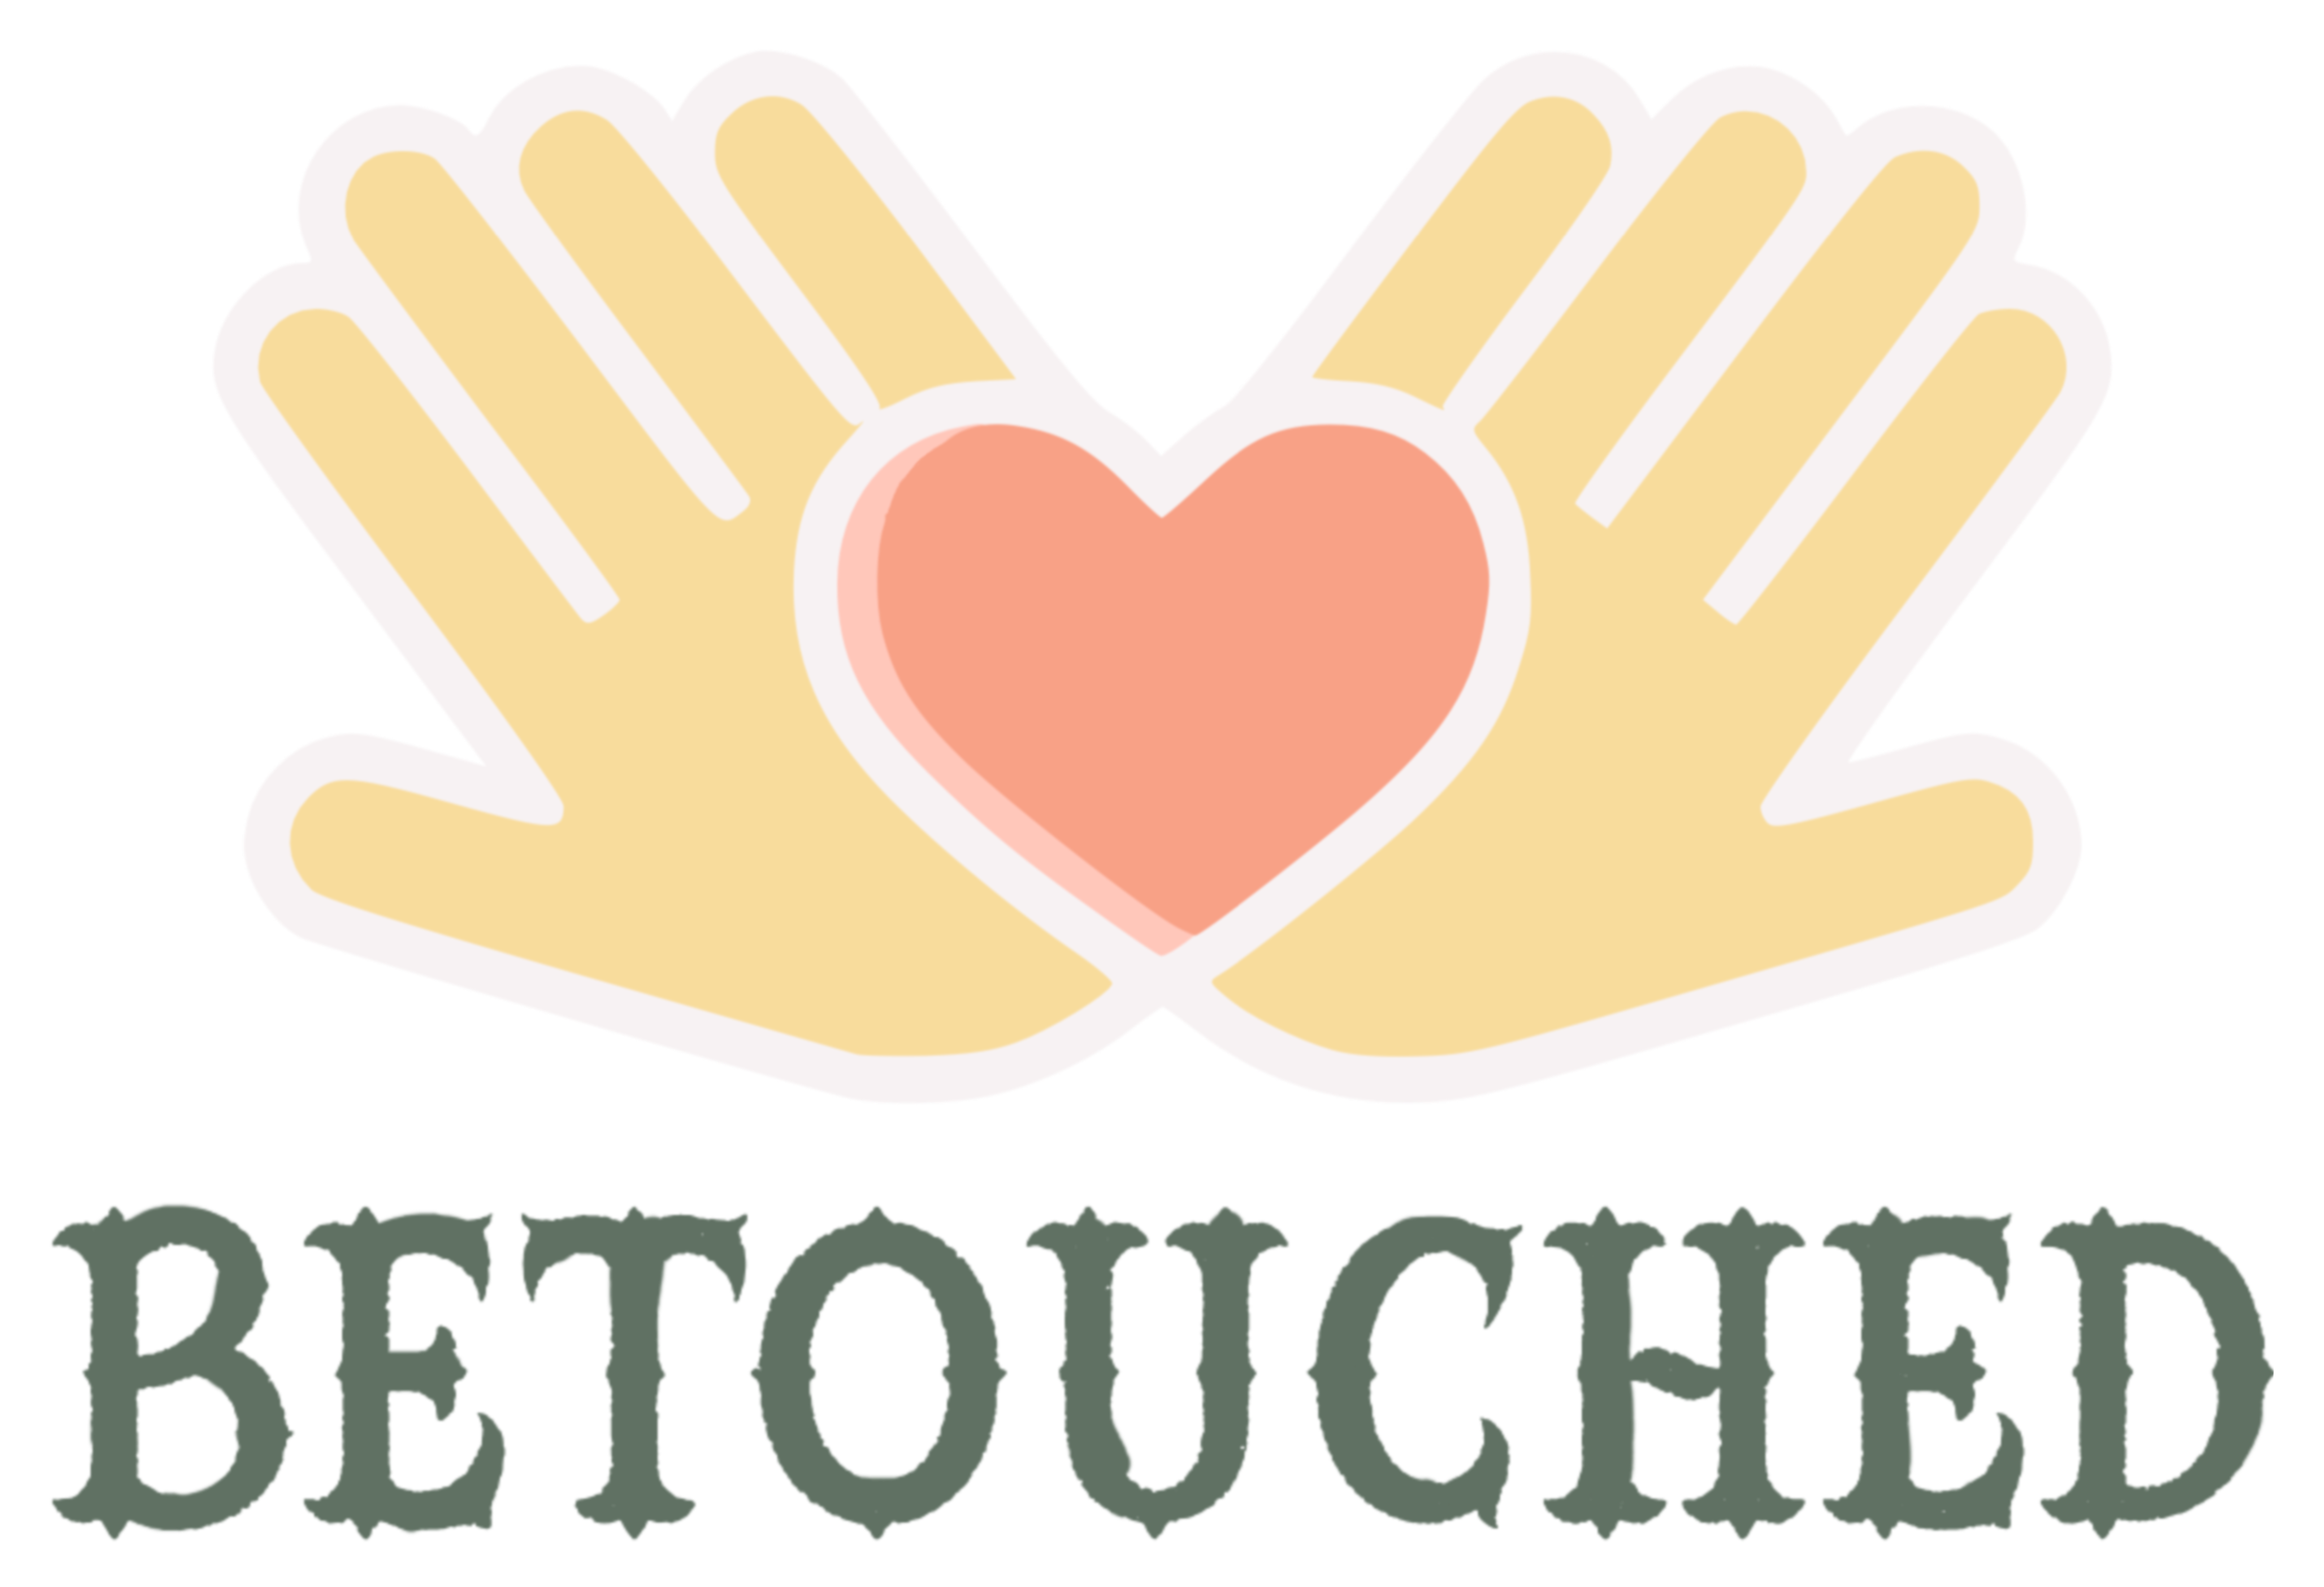 BeTouched